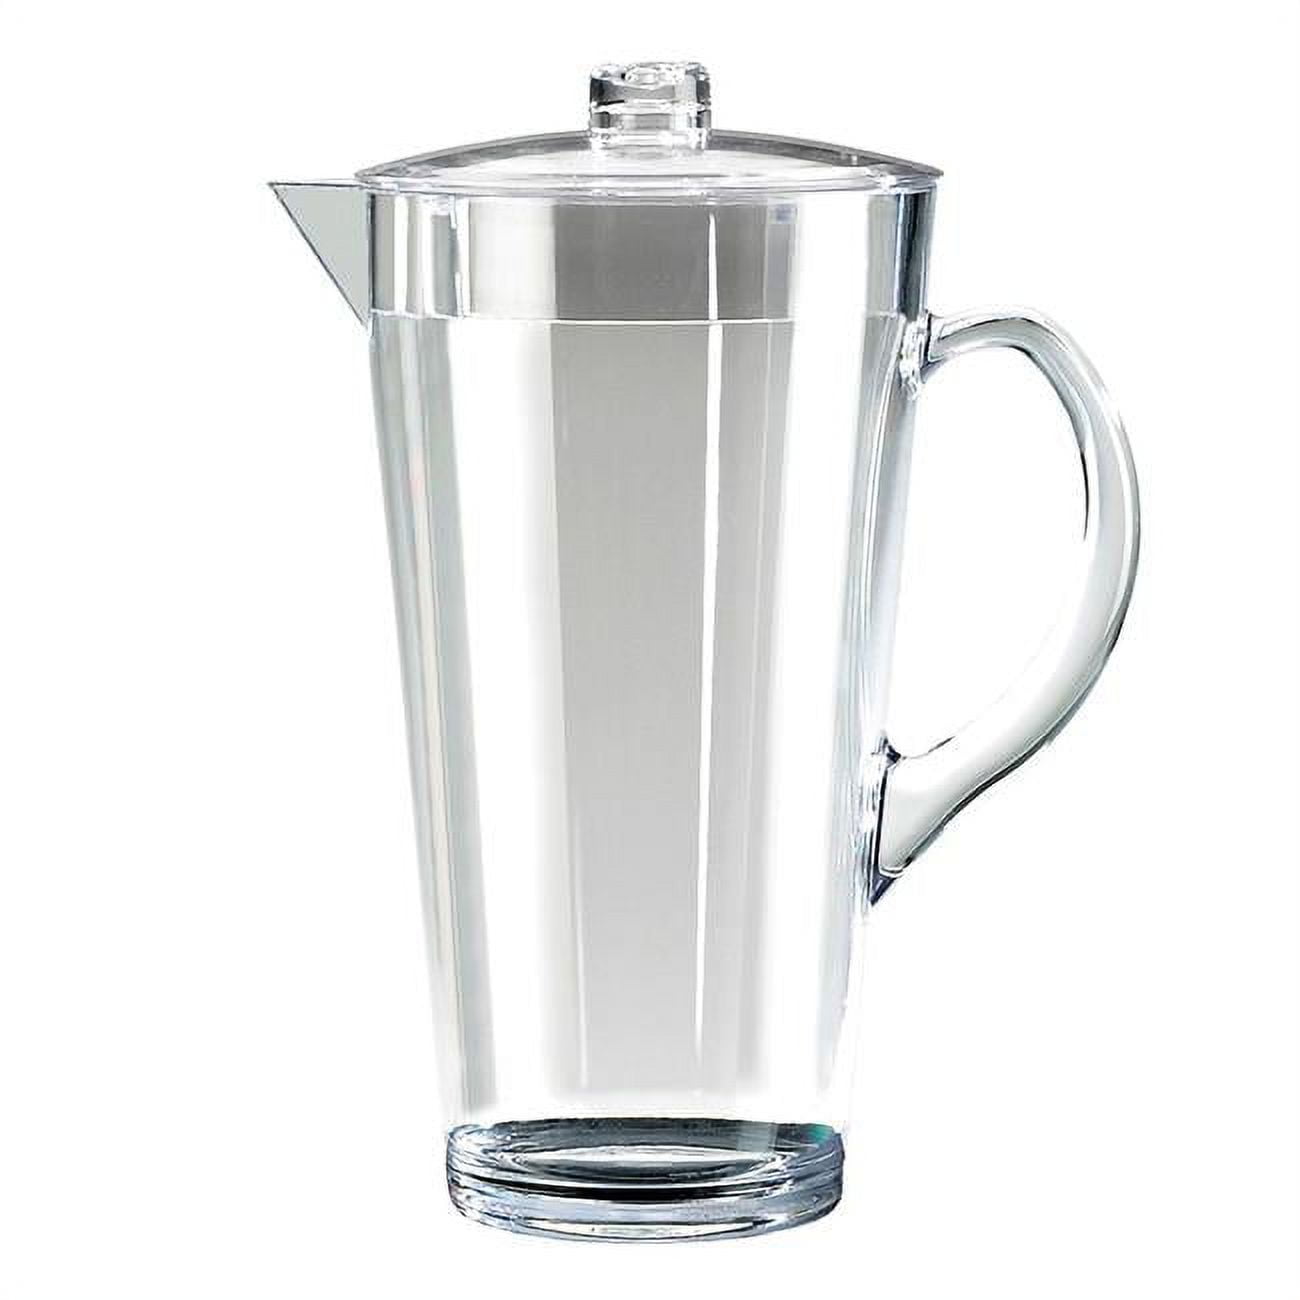 Picture of Cal Mil 682 2 ltr Polycarbonate Pitcher - 9 x 9 x 10 in.